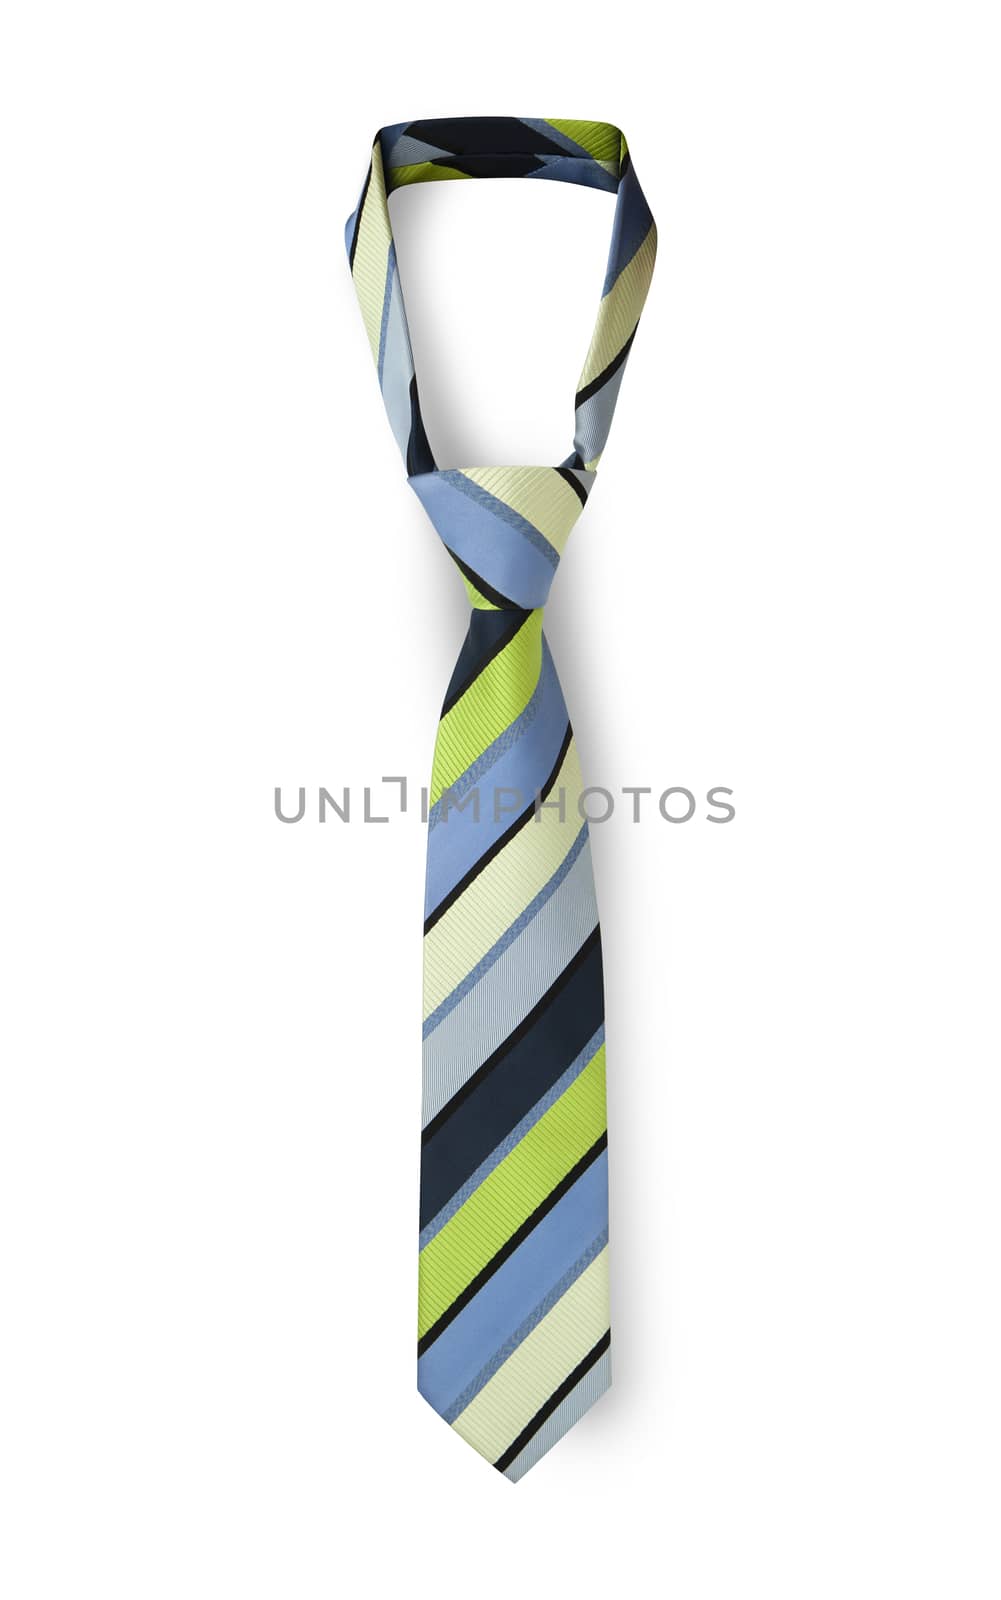 Men's striped tie in different colors taken off for leisure time, isolated on white background. With clipping path.